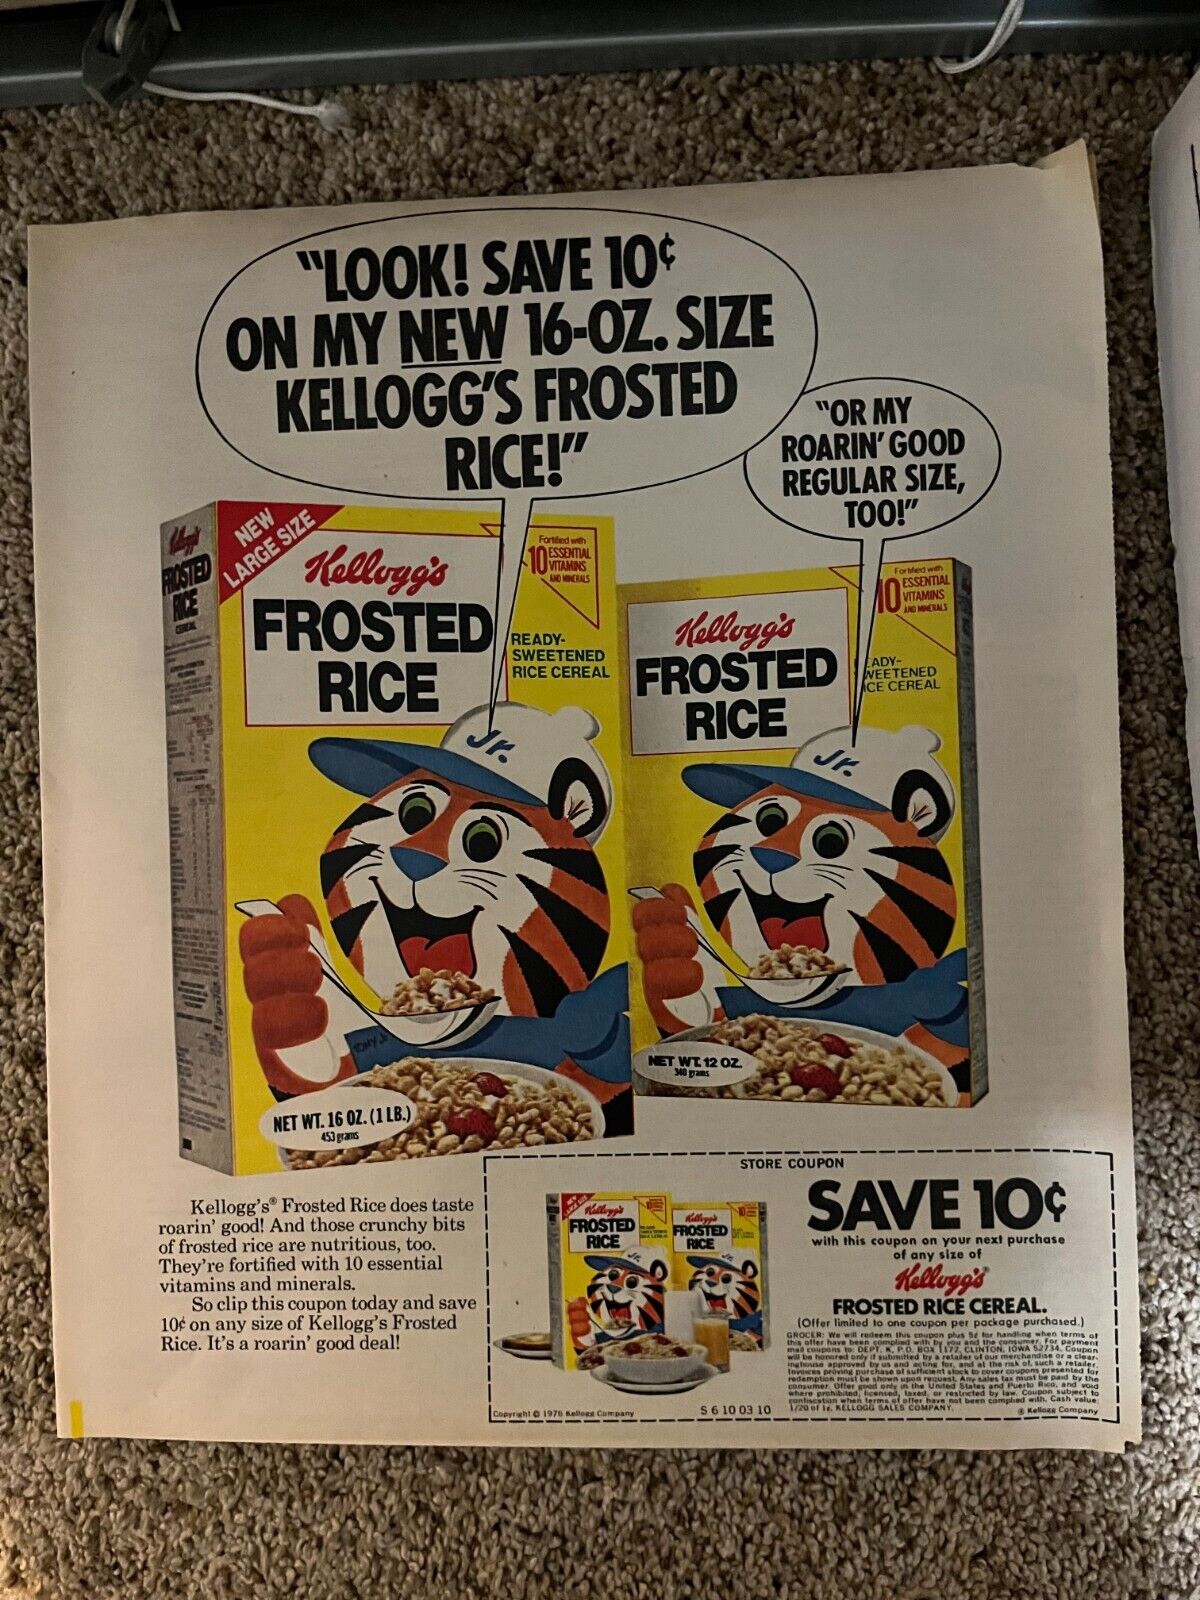 1976 Kellogg's Frosted Rice Newspaper Ad and Coupon Tony Jr.